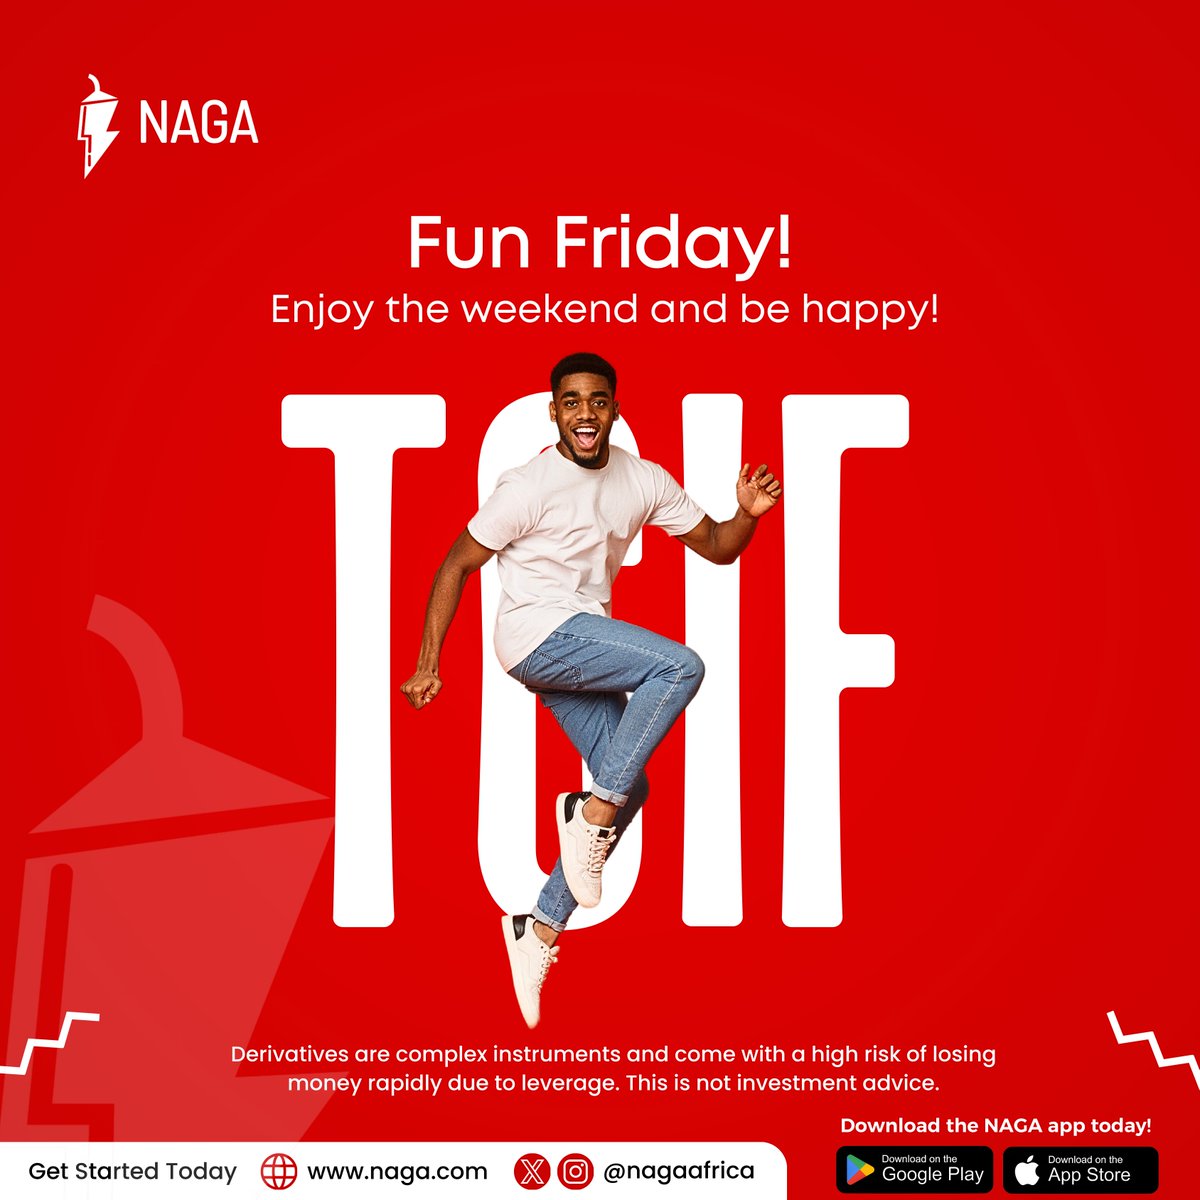 Hello! As the weekend approaches, it's the perfect time to unwind and embrace the joy that comes with it

“Trading is risky, This is not investment advice”

Use NAGA Today📍

#naga #nagaafrica #forexbroker #forex #forextrading #forexmarket #forexnews #tgif #weekend #fridayfeeling